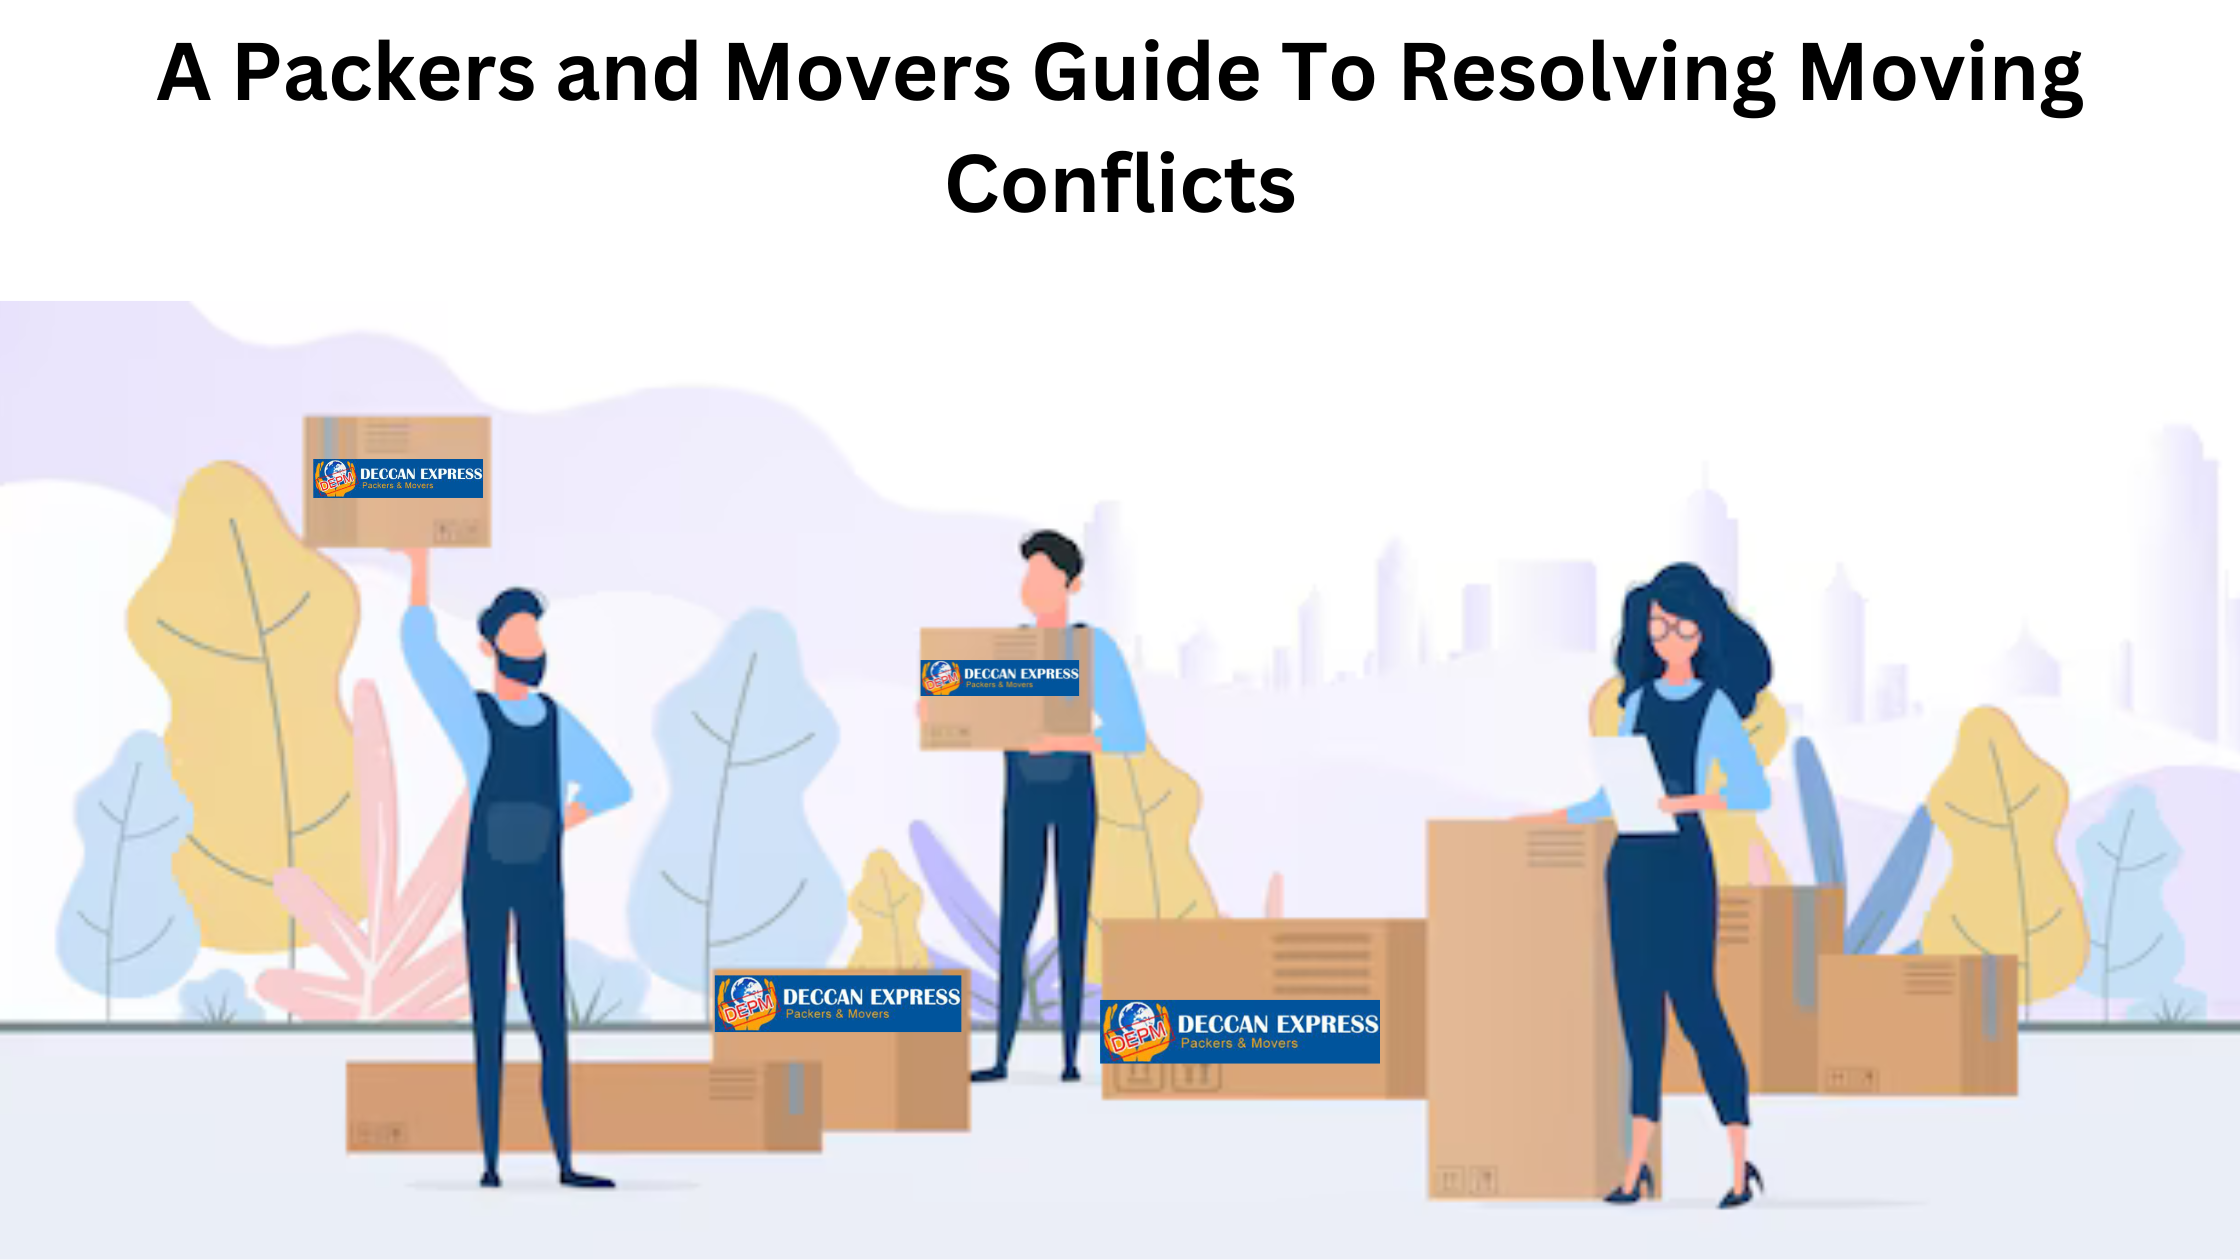 A Packers and Movers Guide To Resolving Moving Conflicts